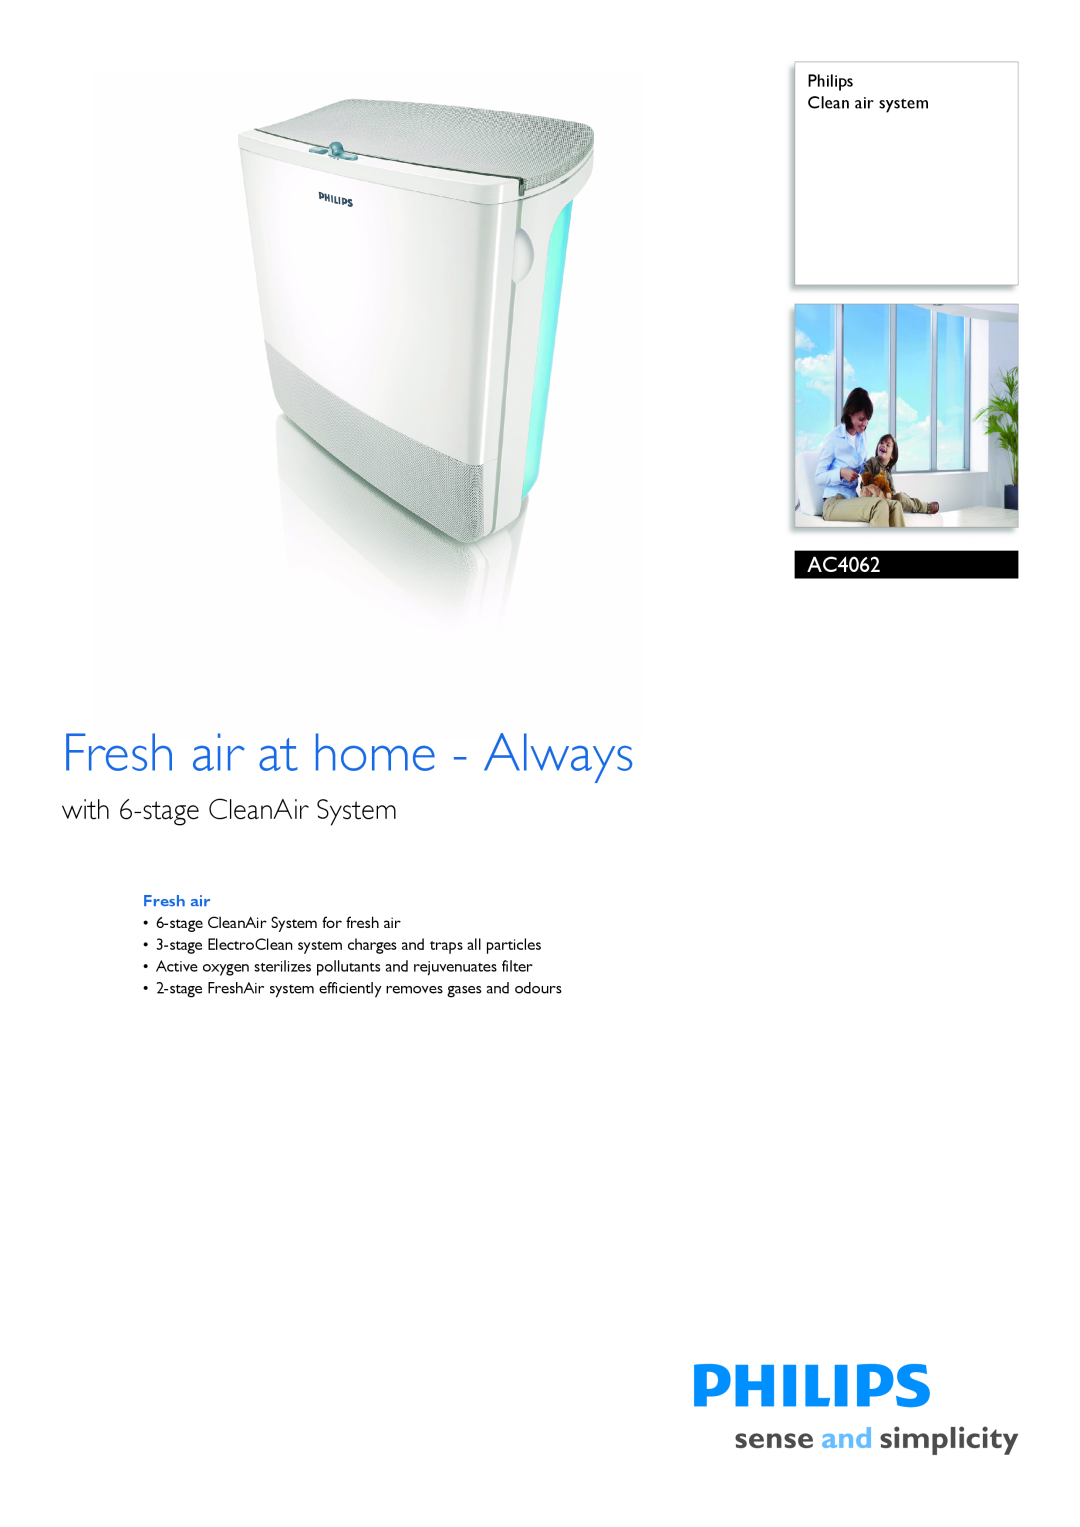 Philips AC4062/00 manual Fresh air at home - Always, with 6-stageCleanAir System, Philips Clean air system 